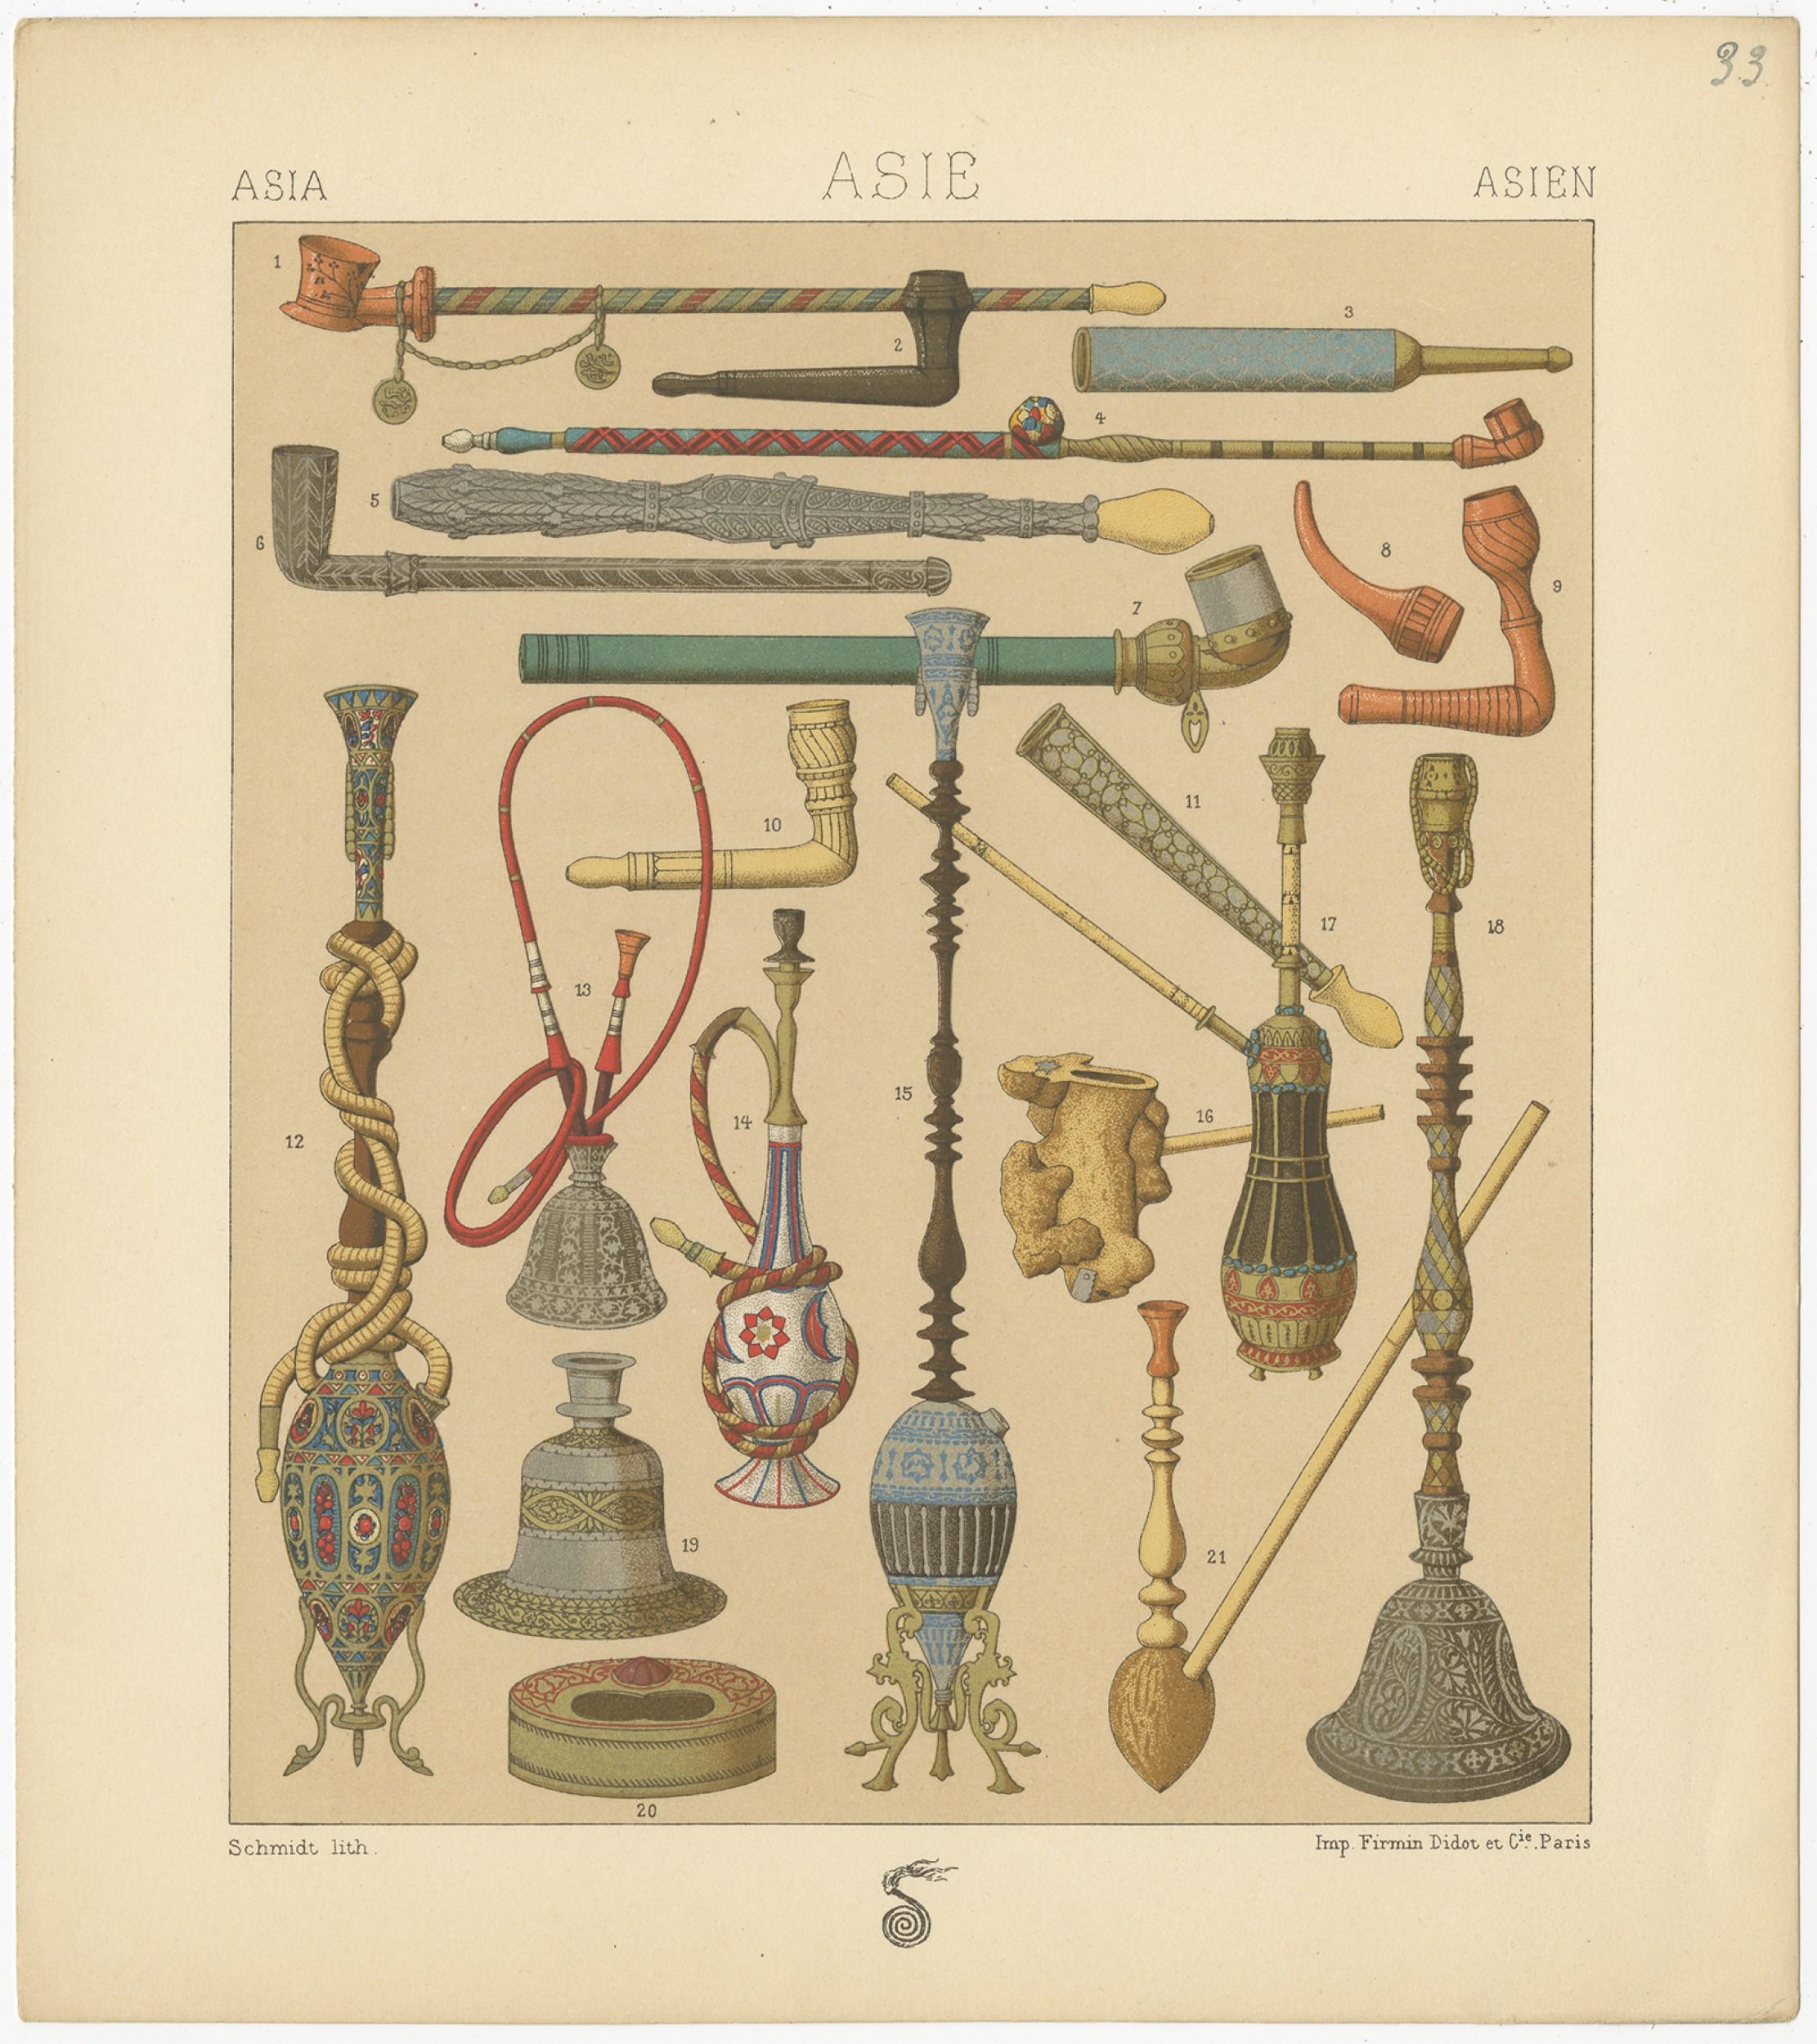 Antique print titled 'Asia - Asie - Asien'. Chromolithograph of Asian Smoking Pipes. This print originates from 'Le Costume Historique' by M.A. Racinet. Published, circa 1880.